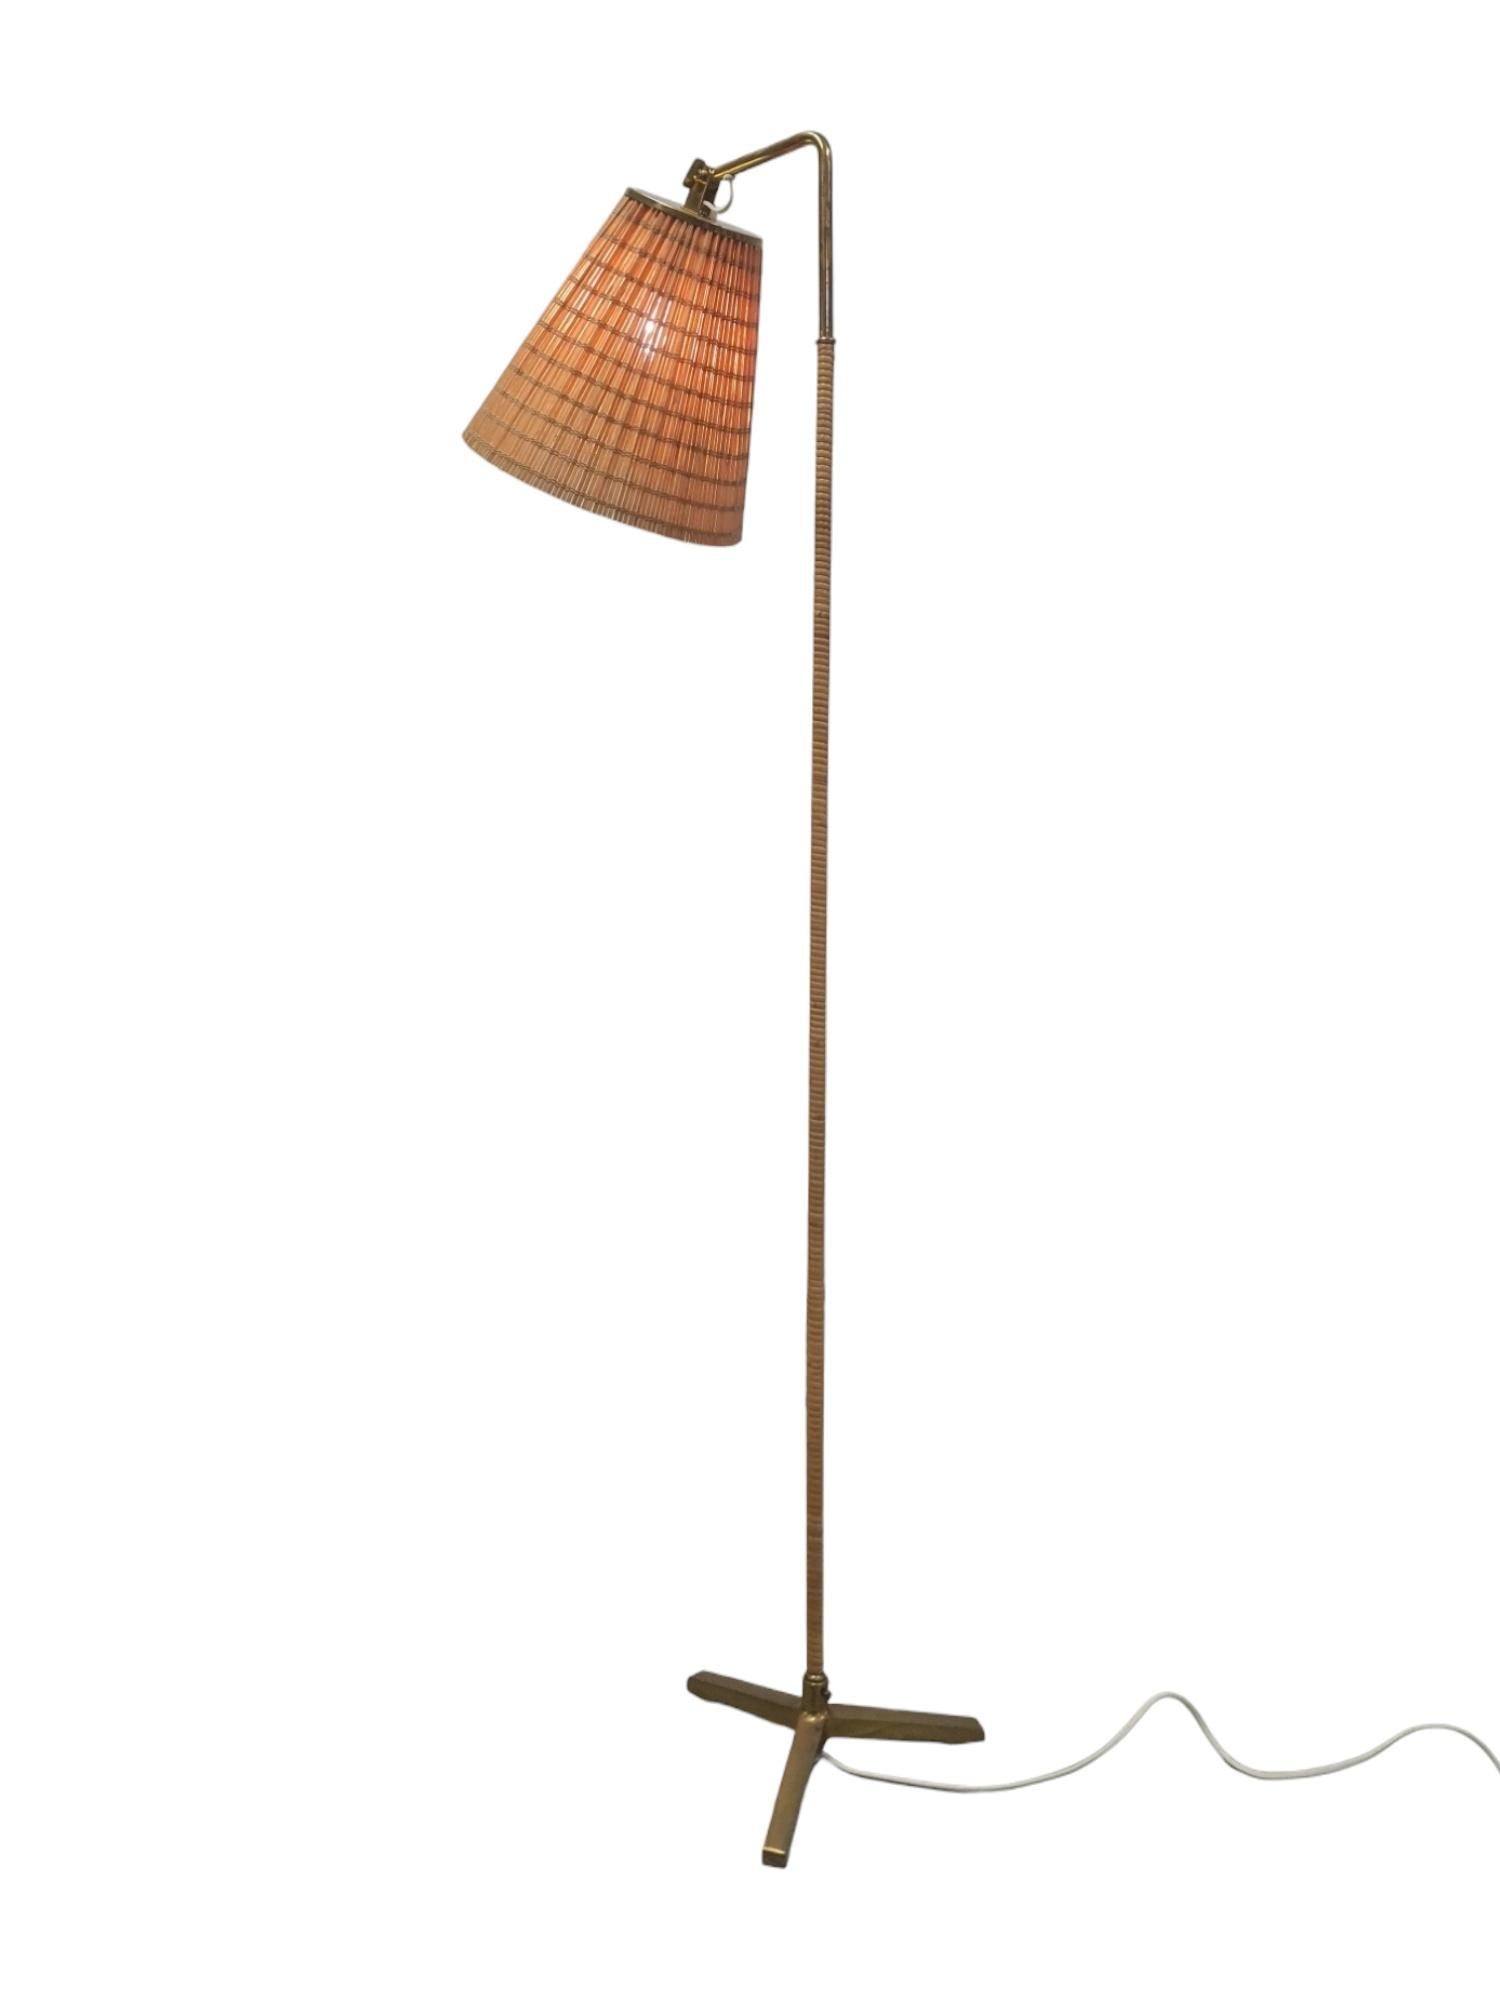 Finnish Paavo Tynell Floor Lamp Model 9631, Taito Oy For Sale